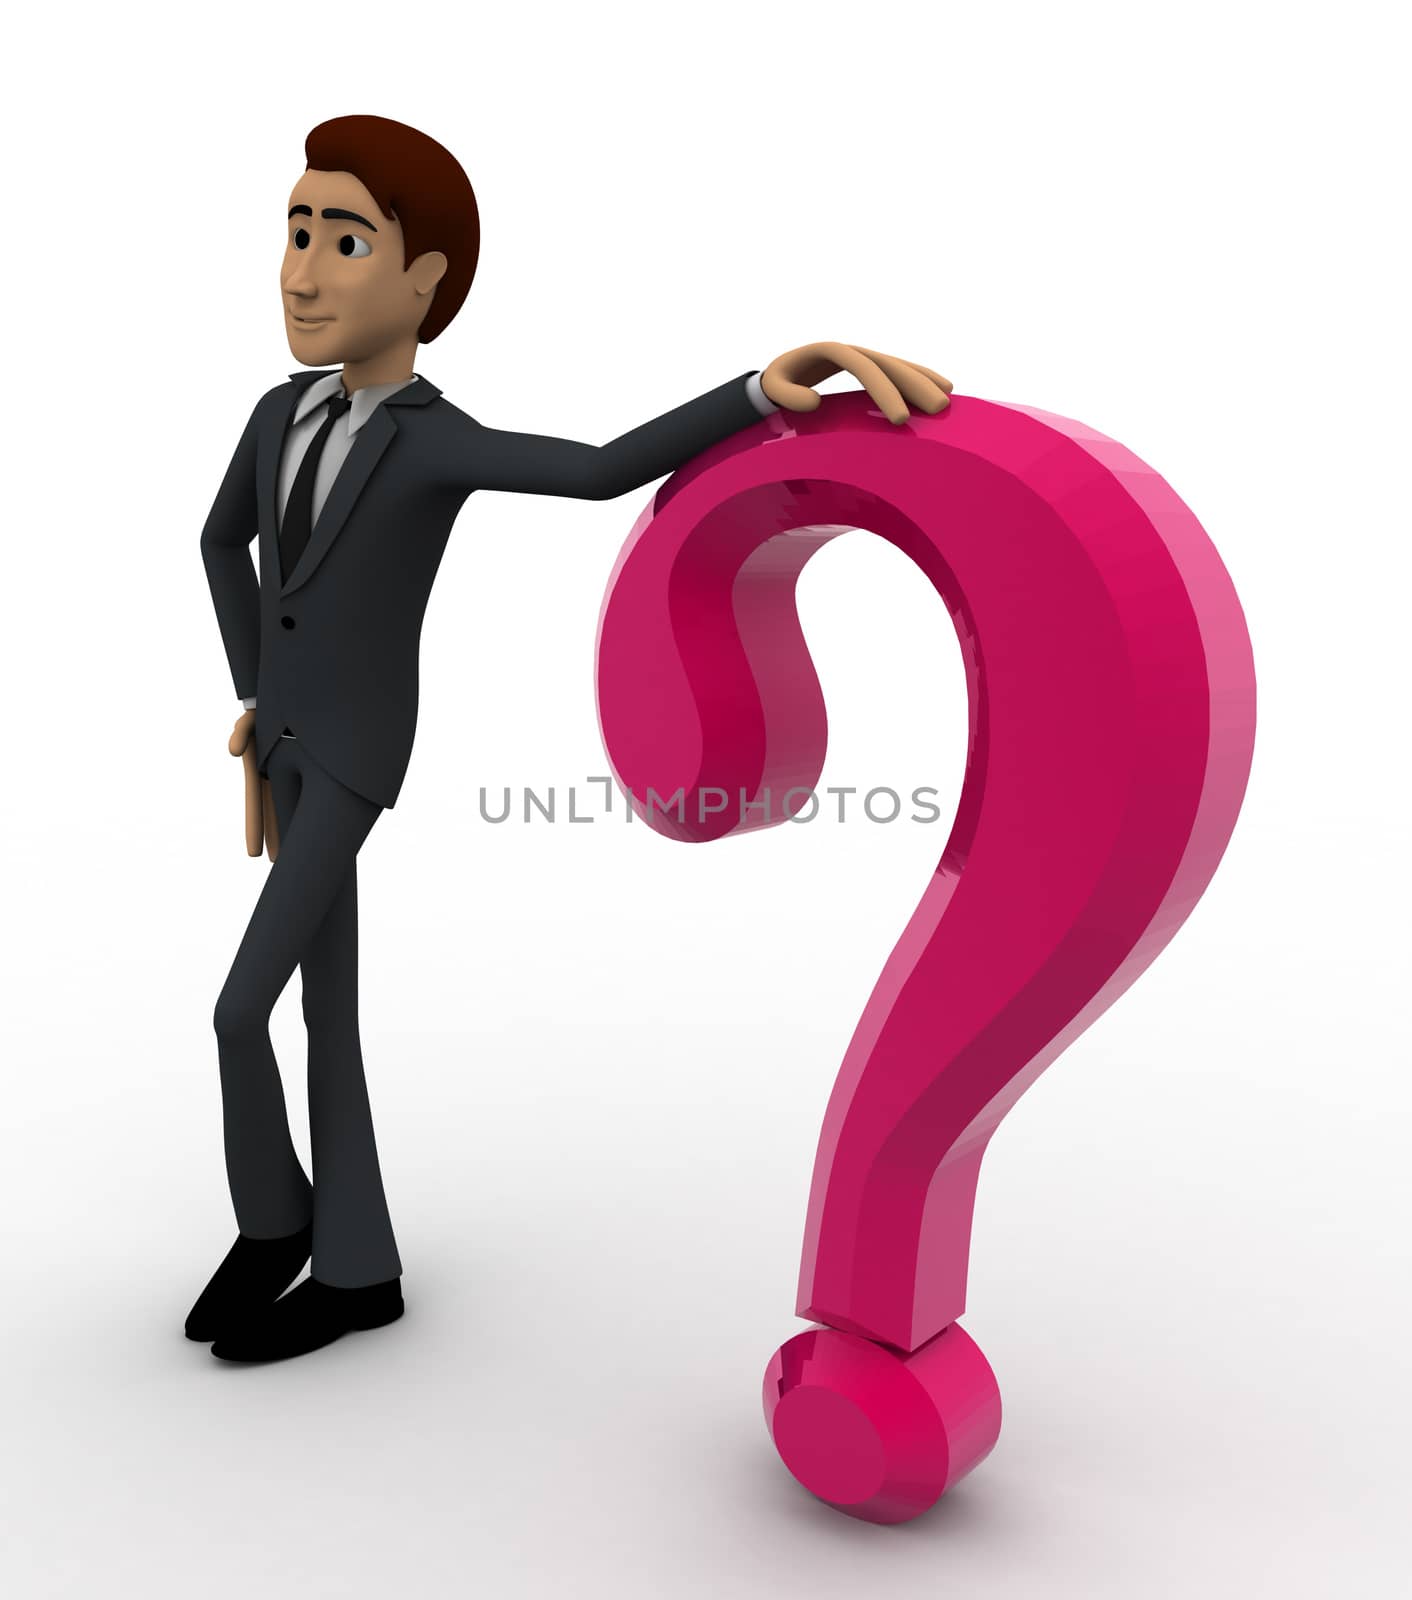 3d man standing beside pink question mark symbol concept by touchmenithin@gmail.com